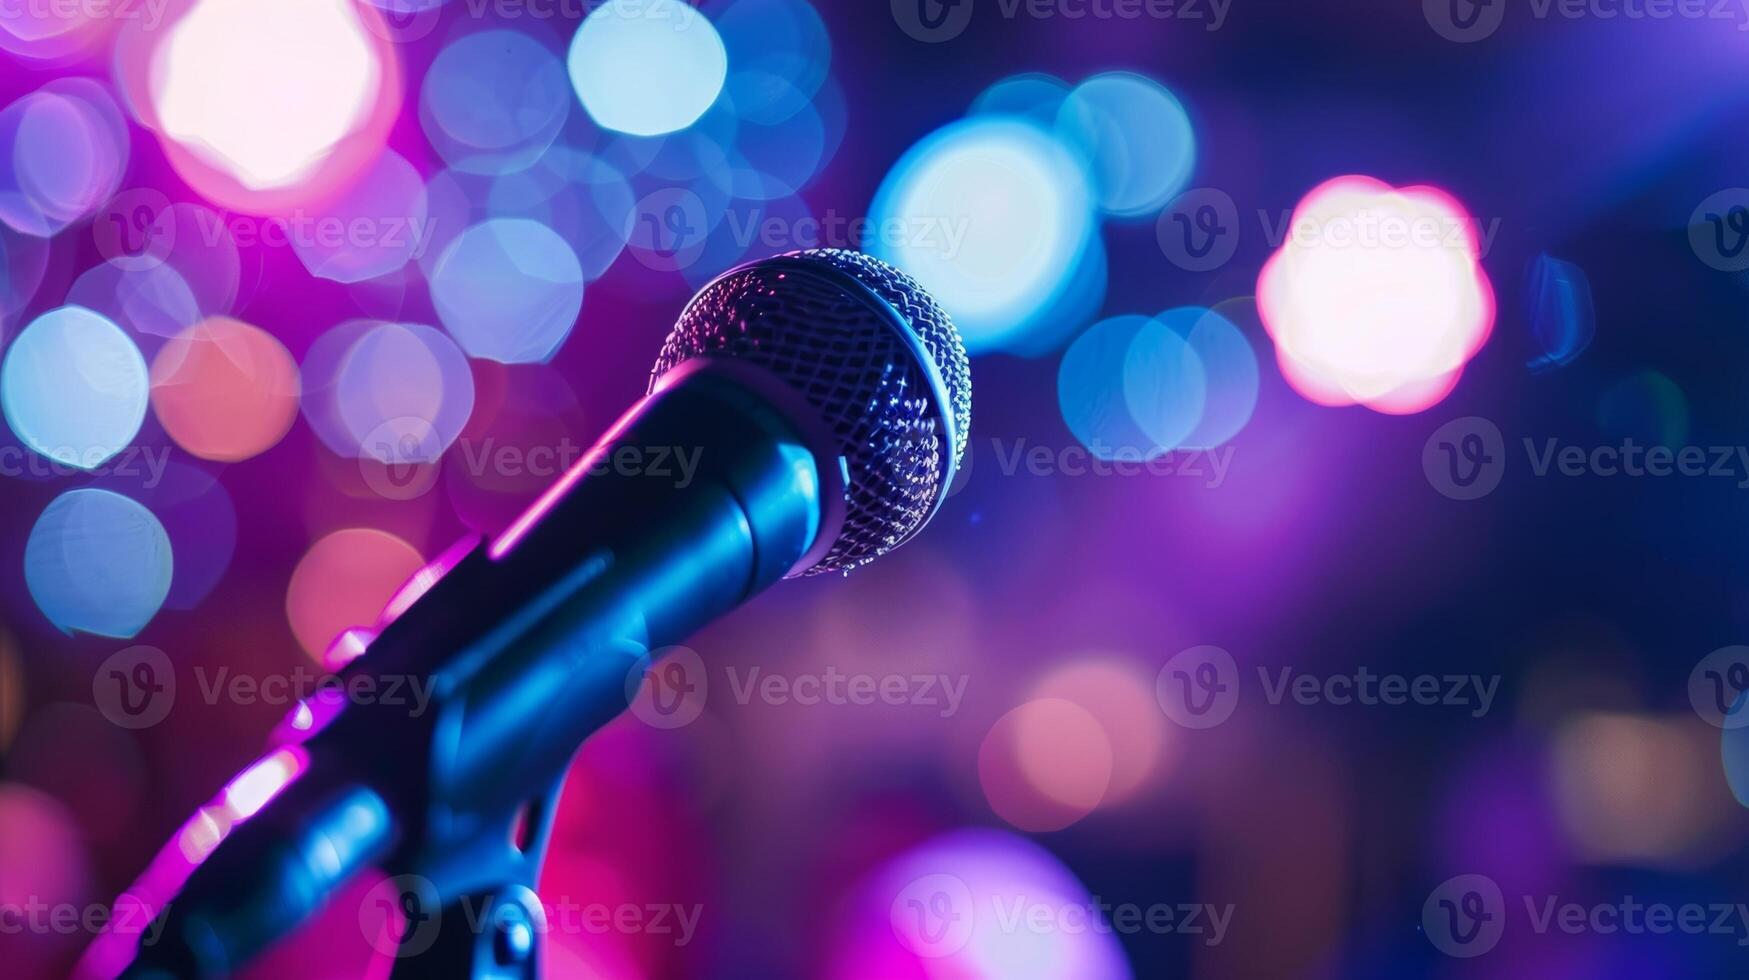 A performer takes the stage their clear and steady voice captivating the audience without the use of alcohol photo